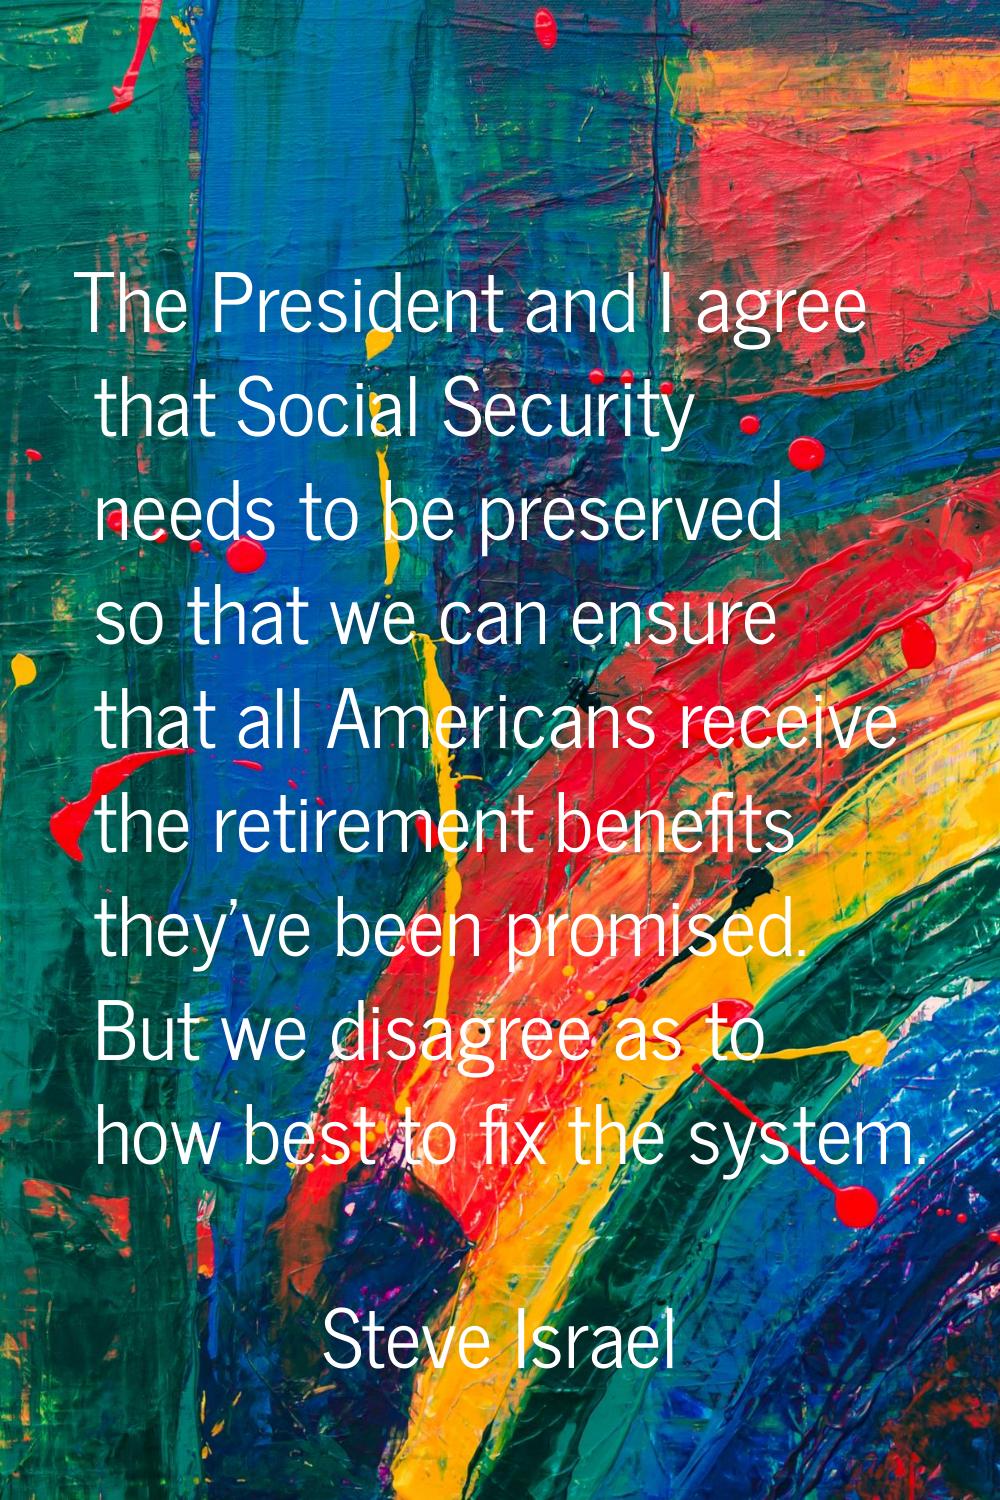 The President and I agree that Social Security needs to be preserved so that we can ensure that all